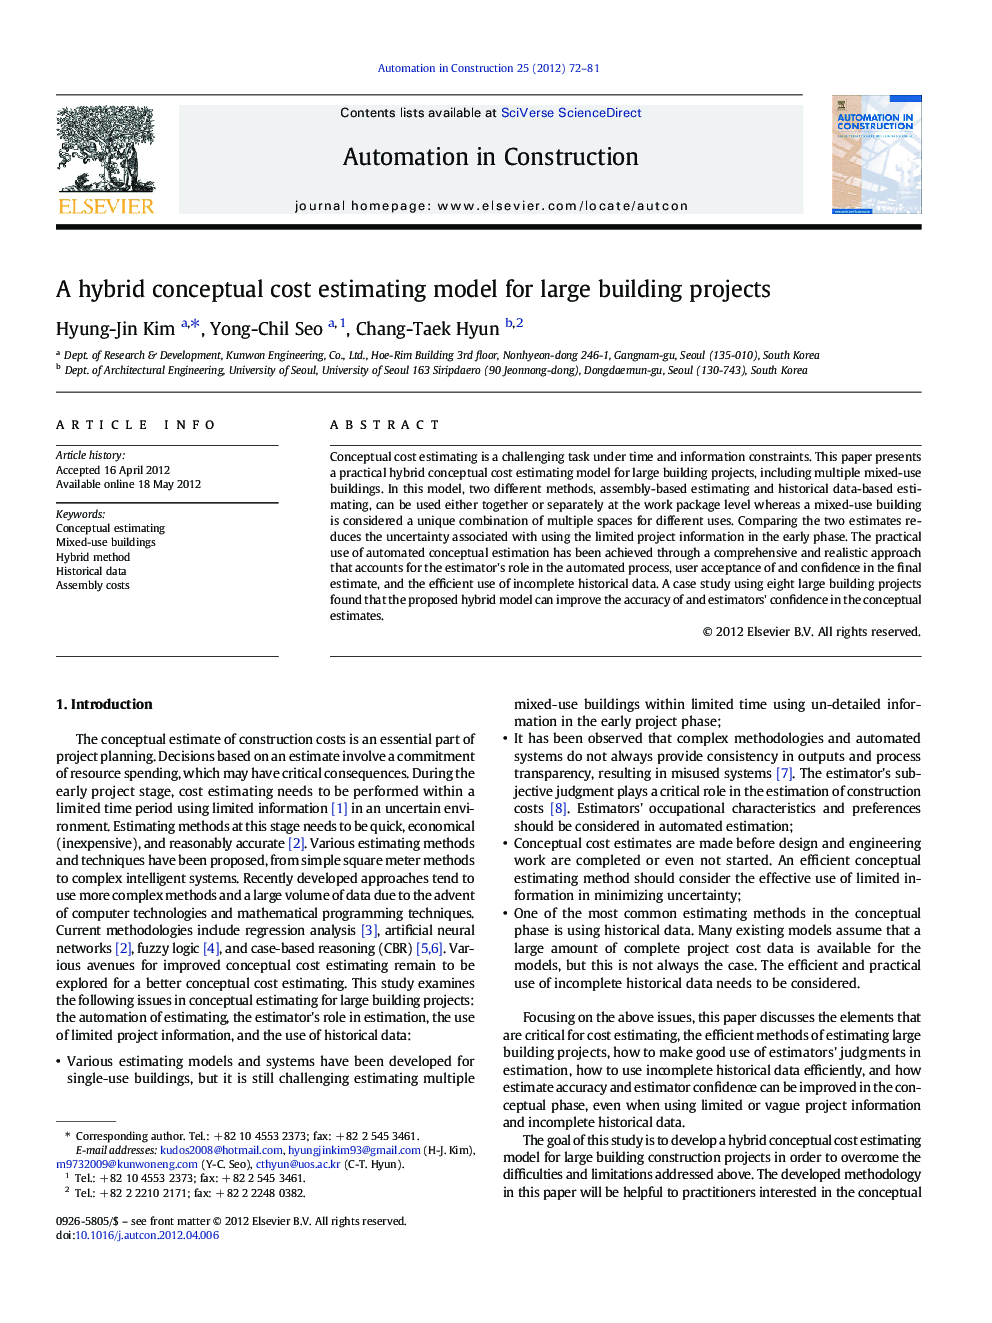 A hybrid conceptual cost estimating model for large building projects